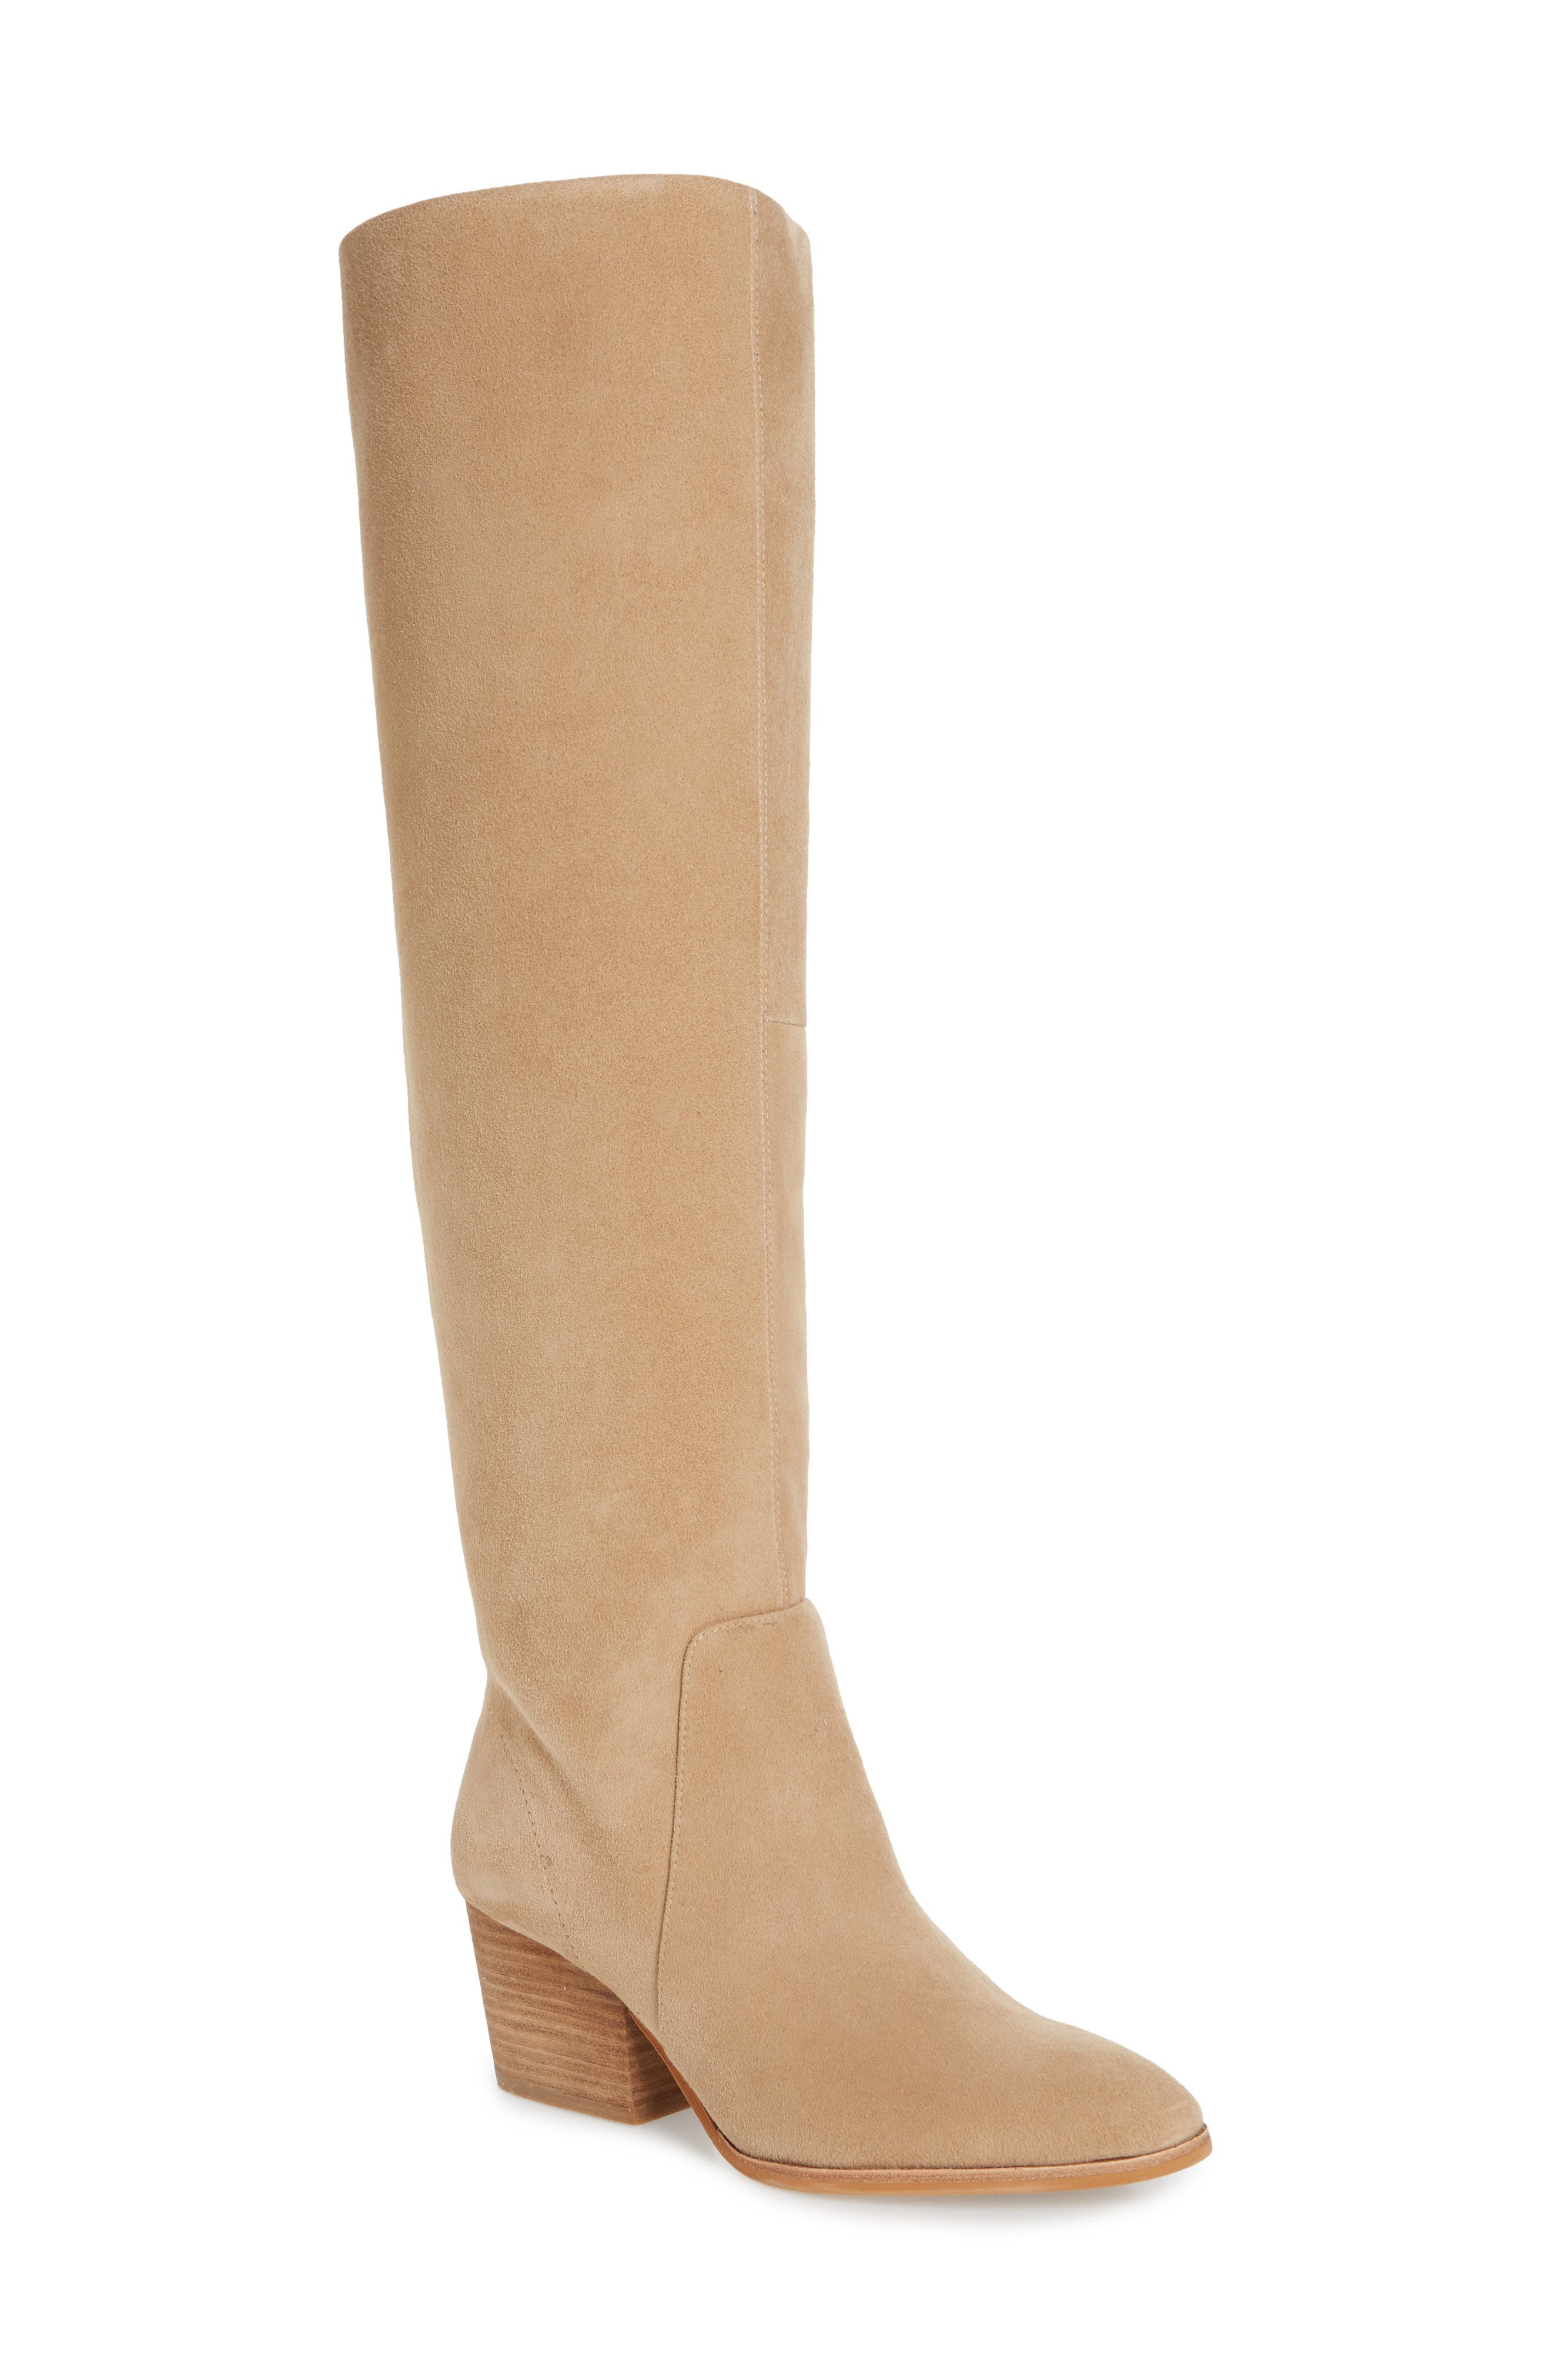 vince camuto boots nordstrom